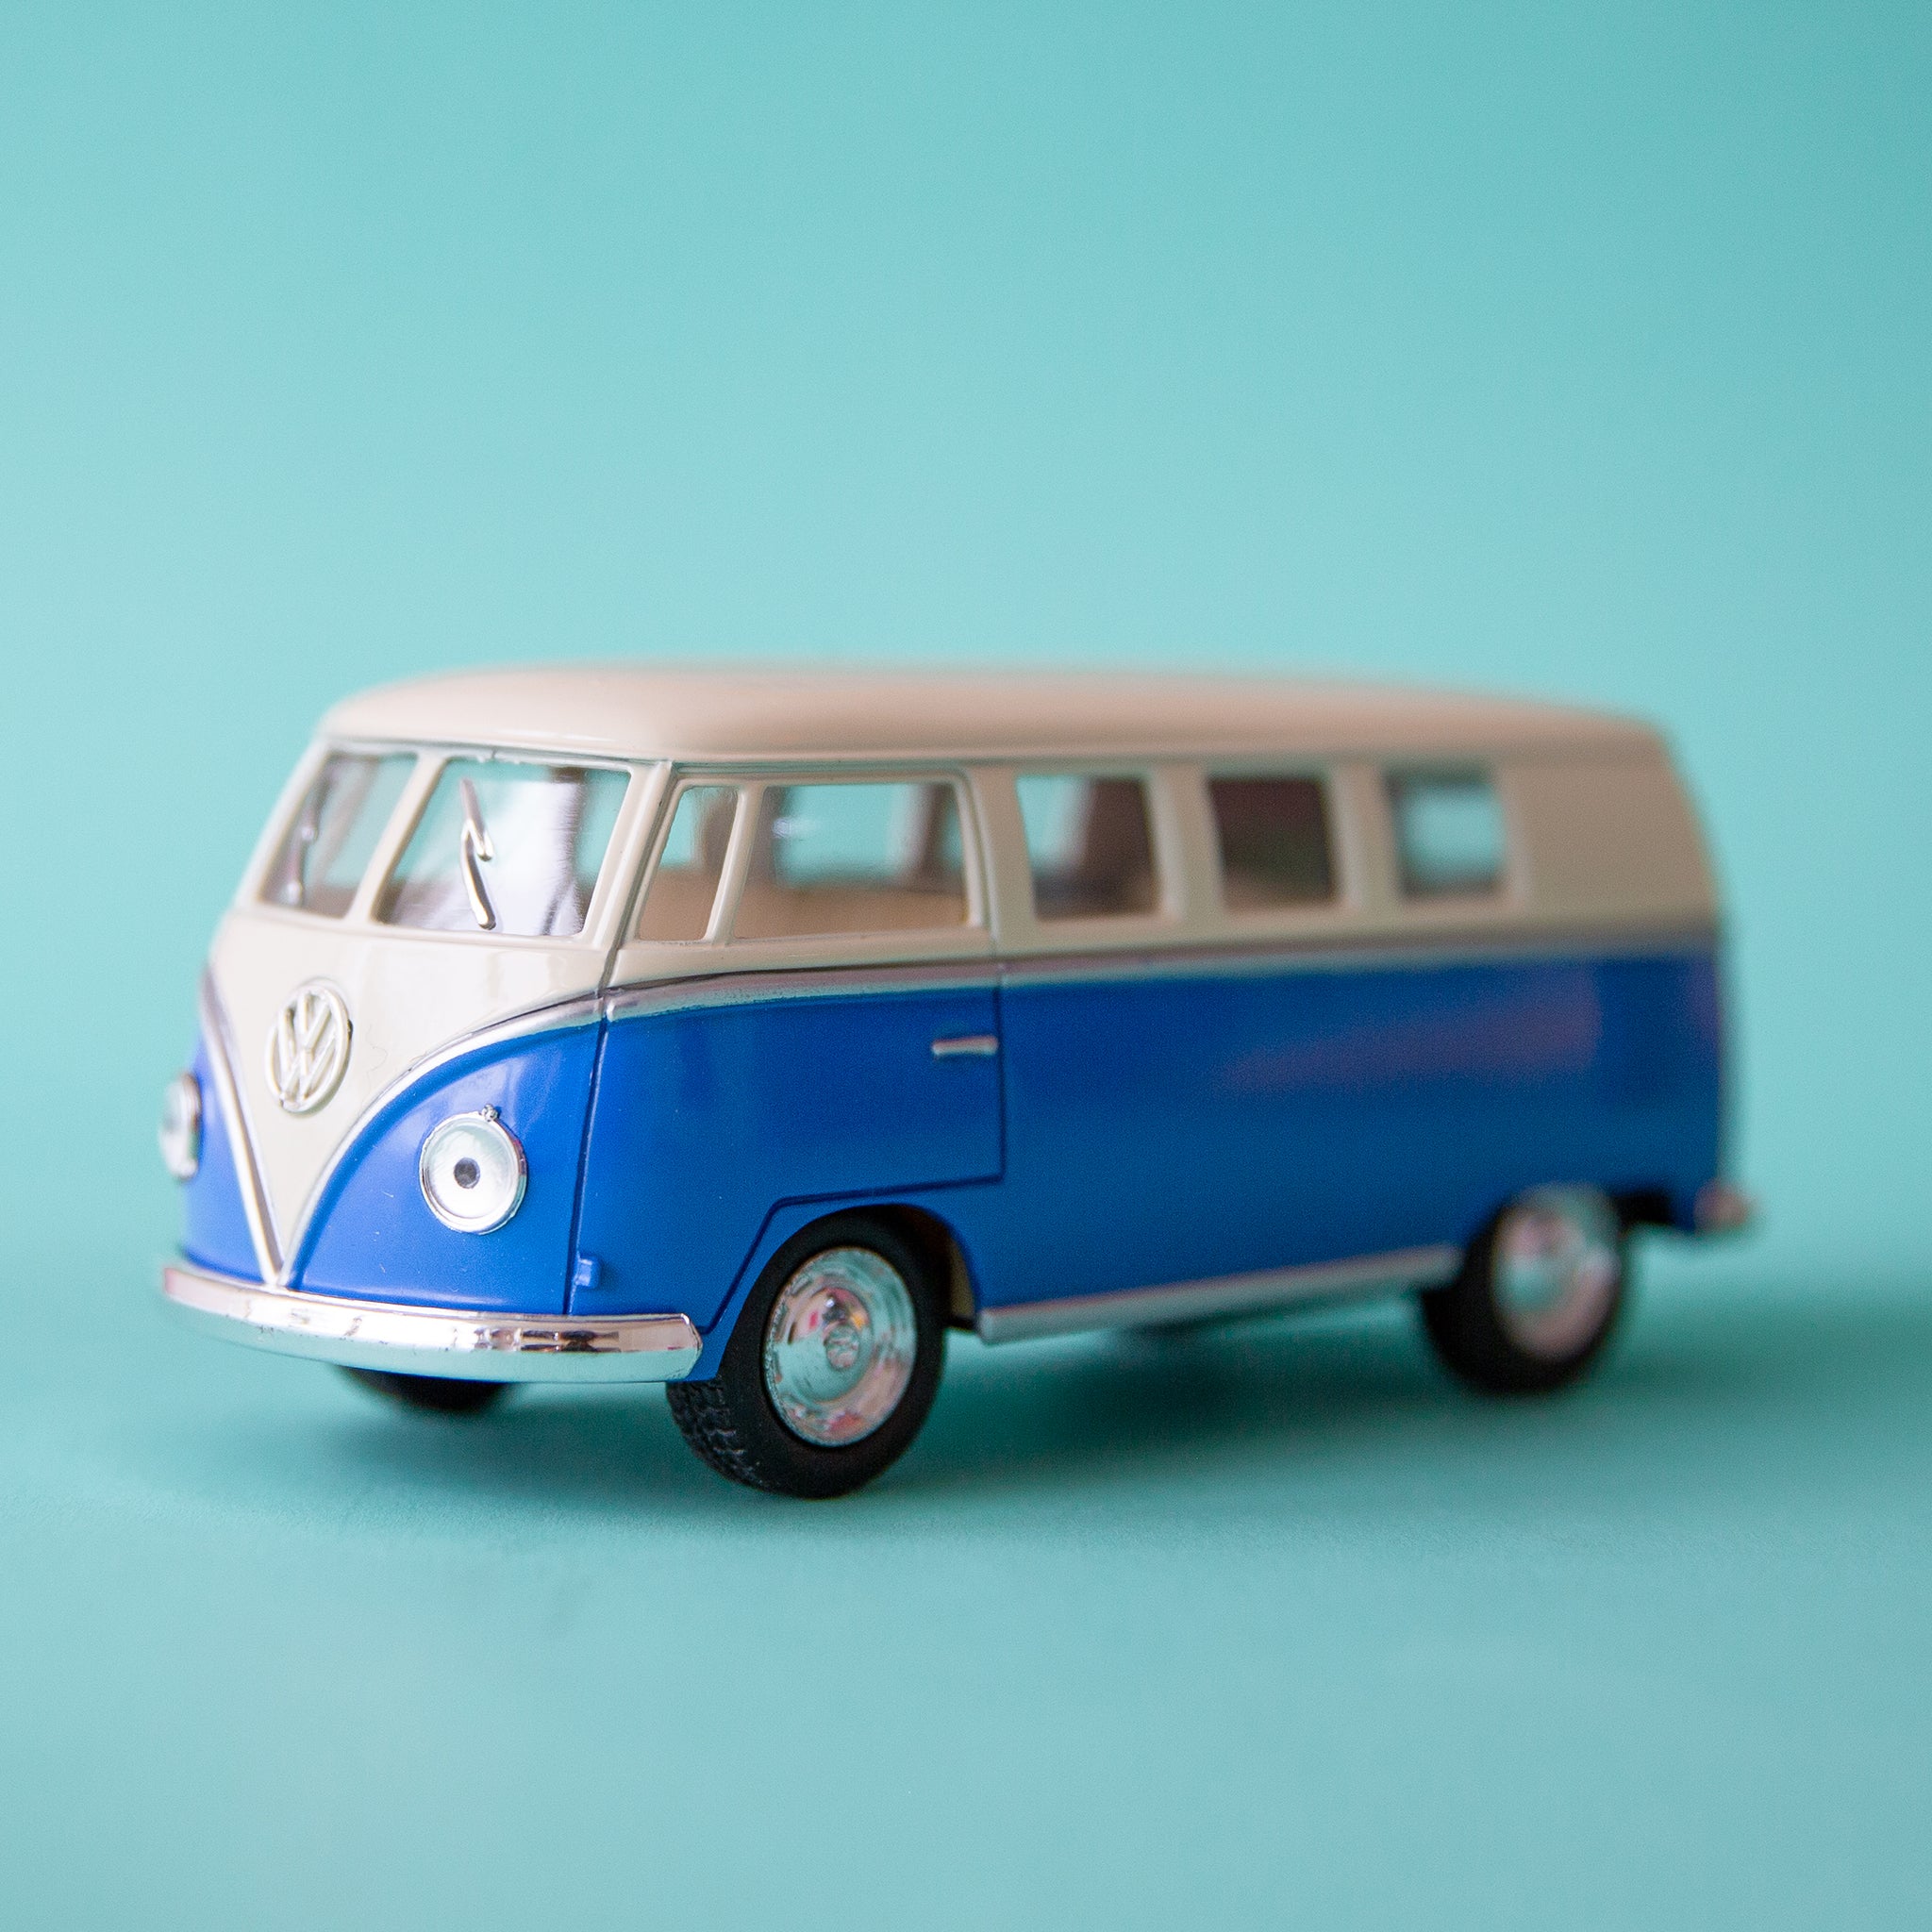 On a blue background is a blue and white VW bus toy.